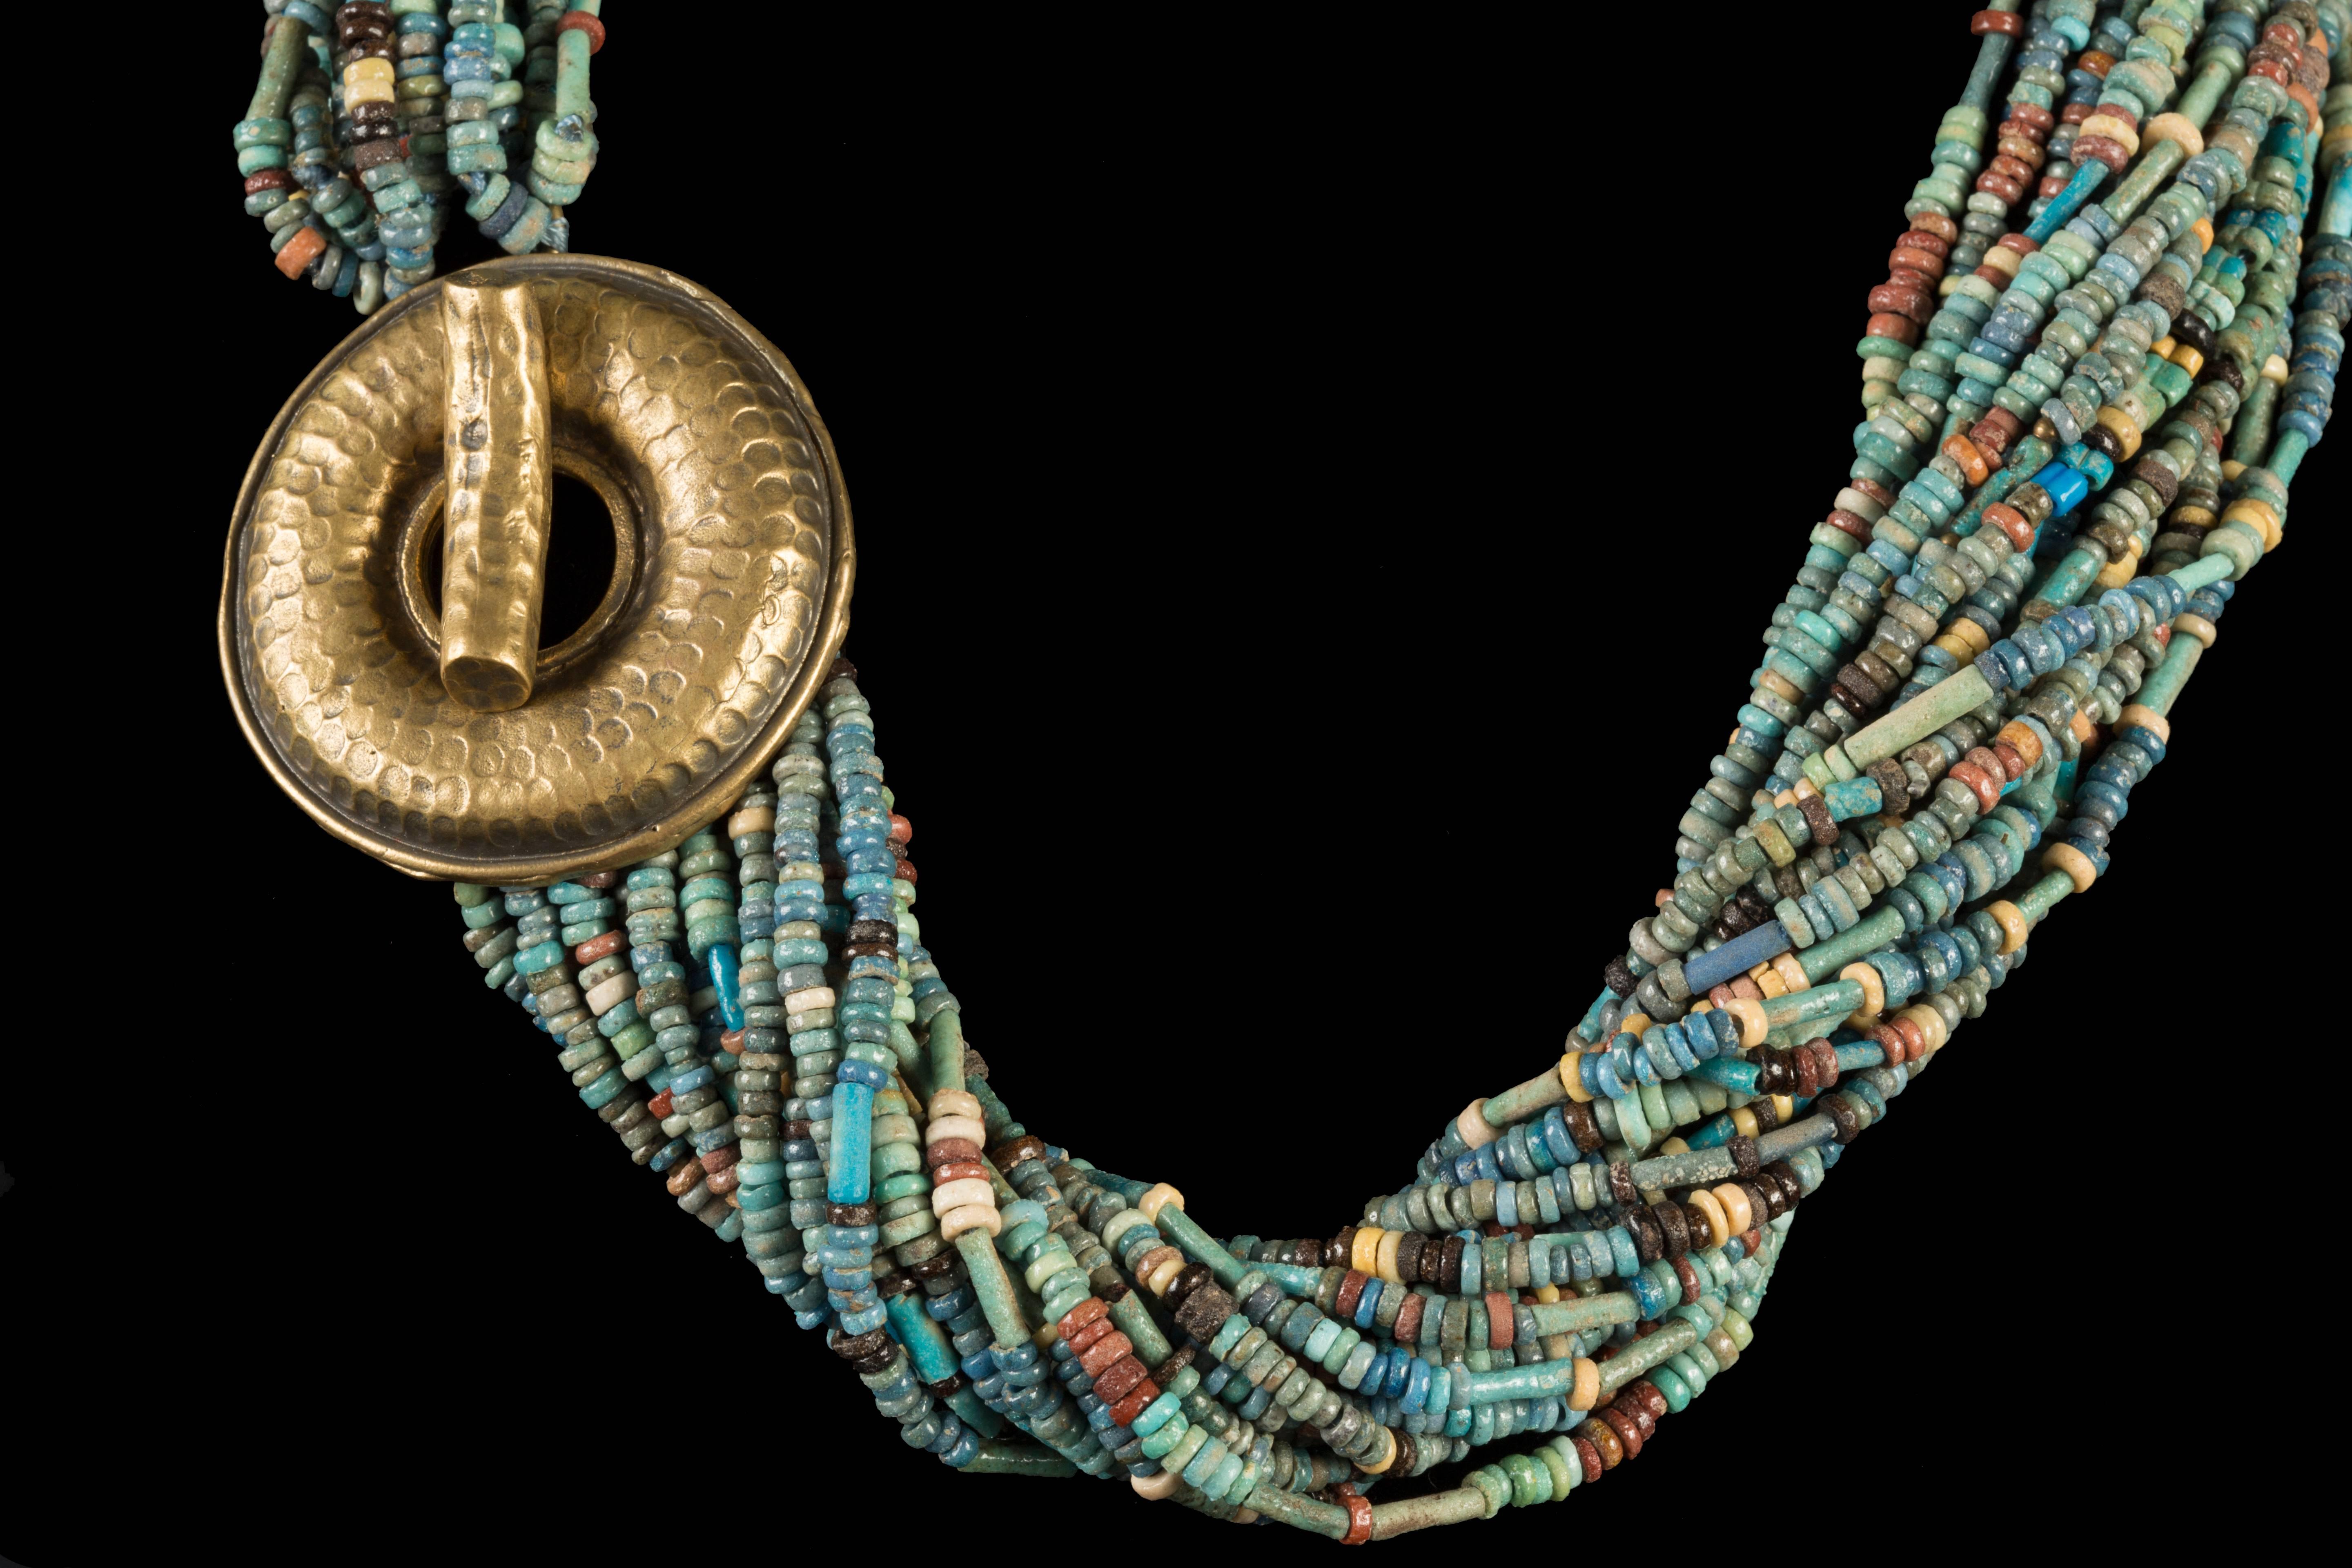 20 String Necklace of Antique Egyptian (2,500 Years Old) Multicolor Faience Beads with Modern Bronze Toggle. 